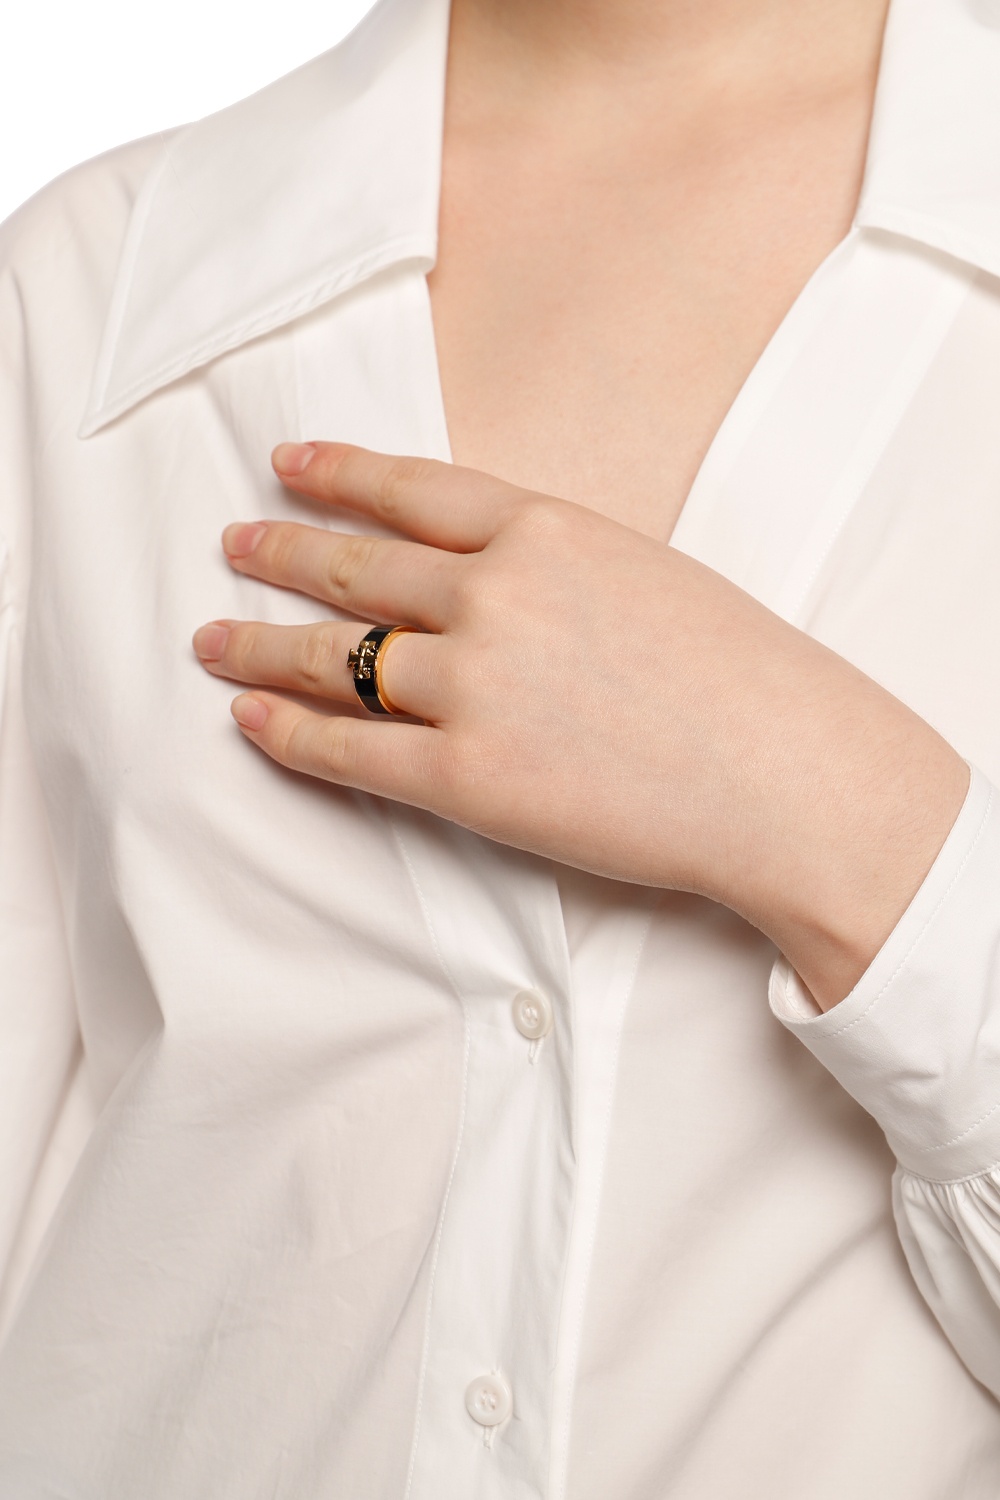 Engagement Ring Seen Wearing Tory Burch - Racked